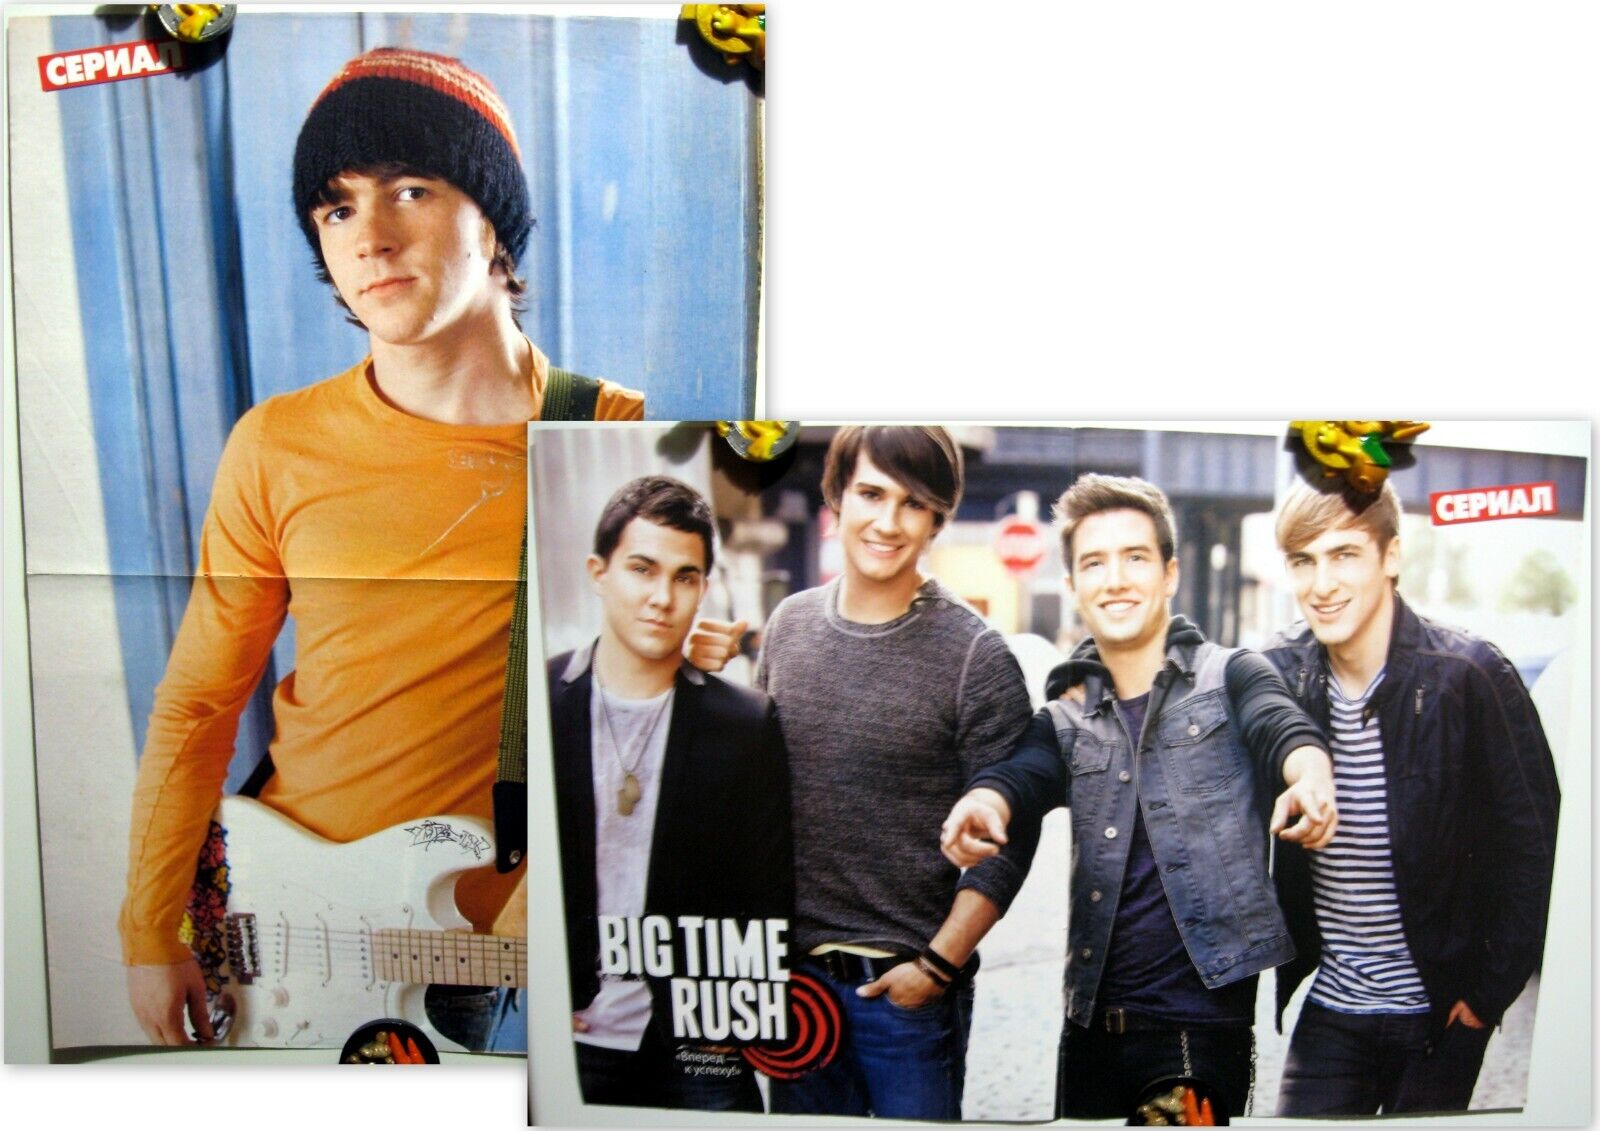 Drake Bell / Big Time Rush two-sided magazine poster A3 16x11